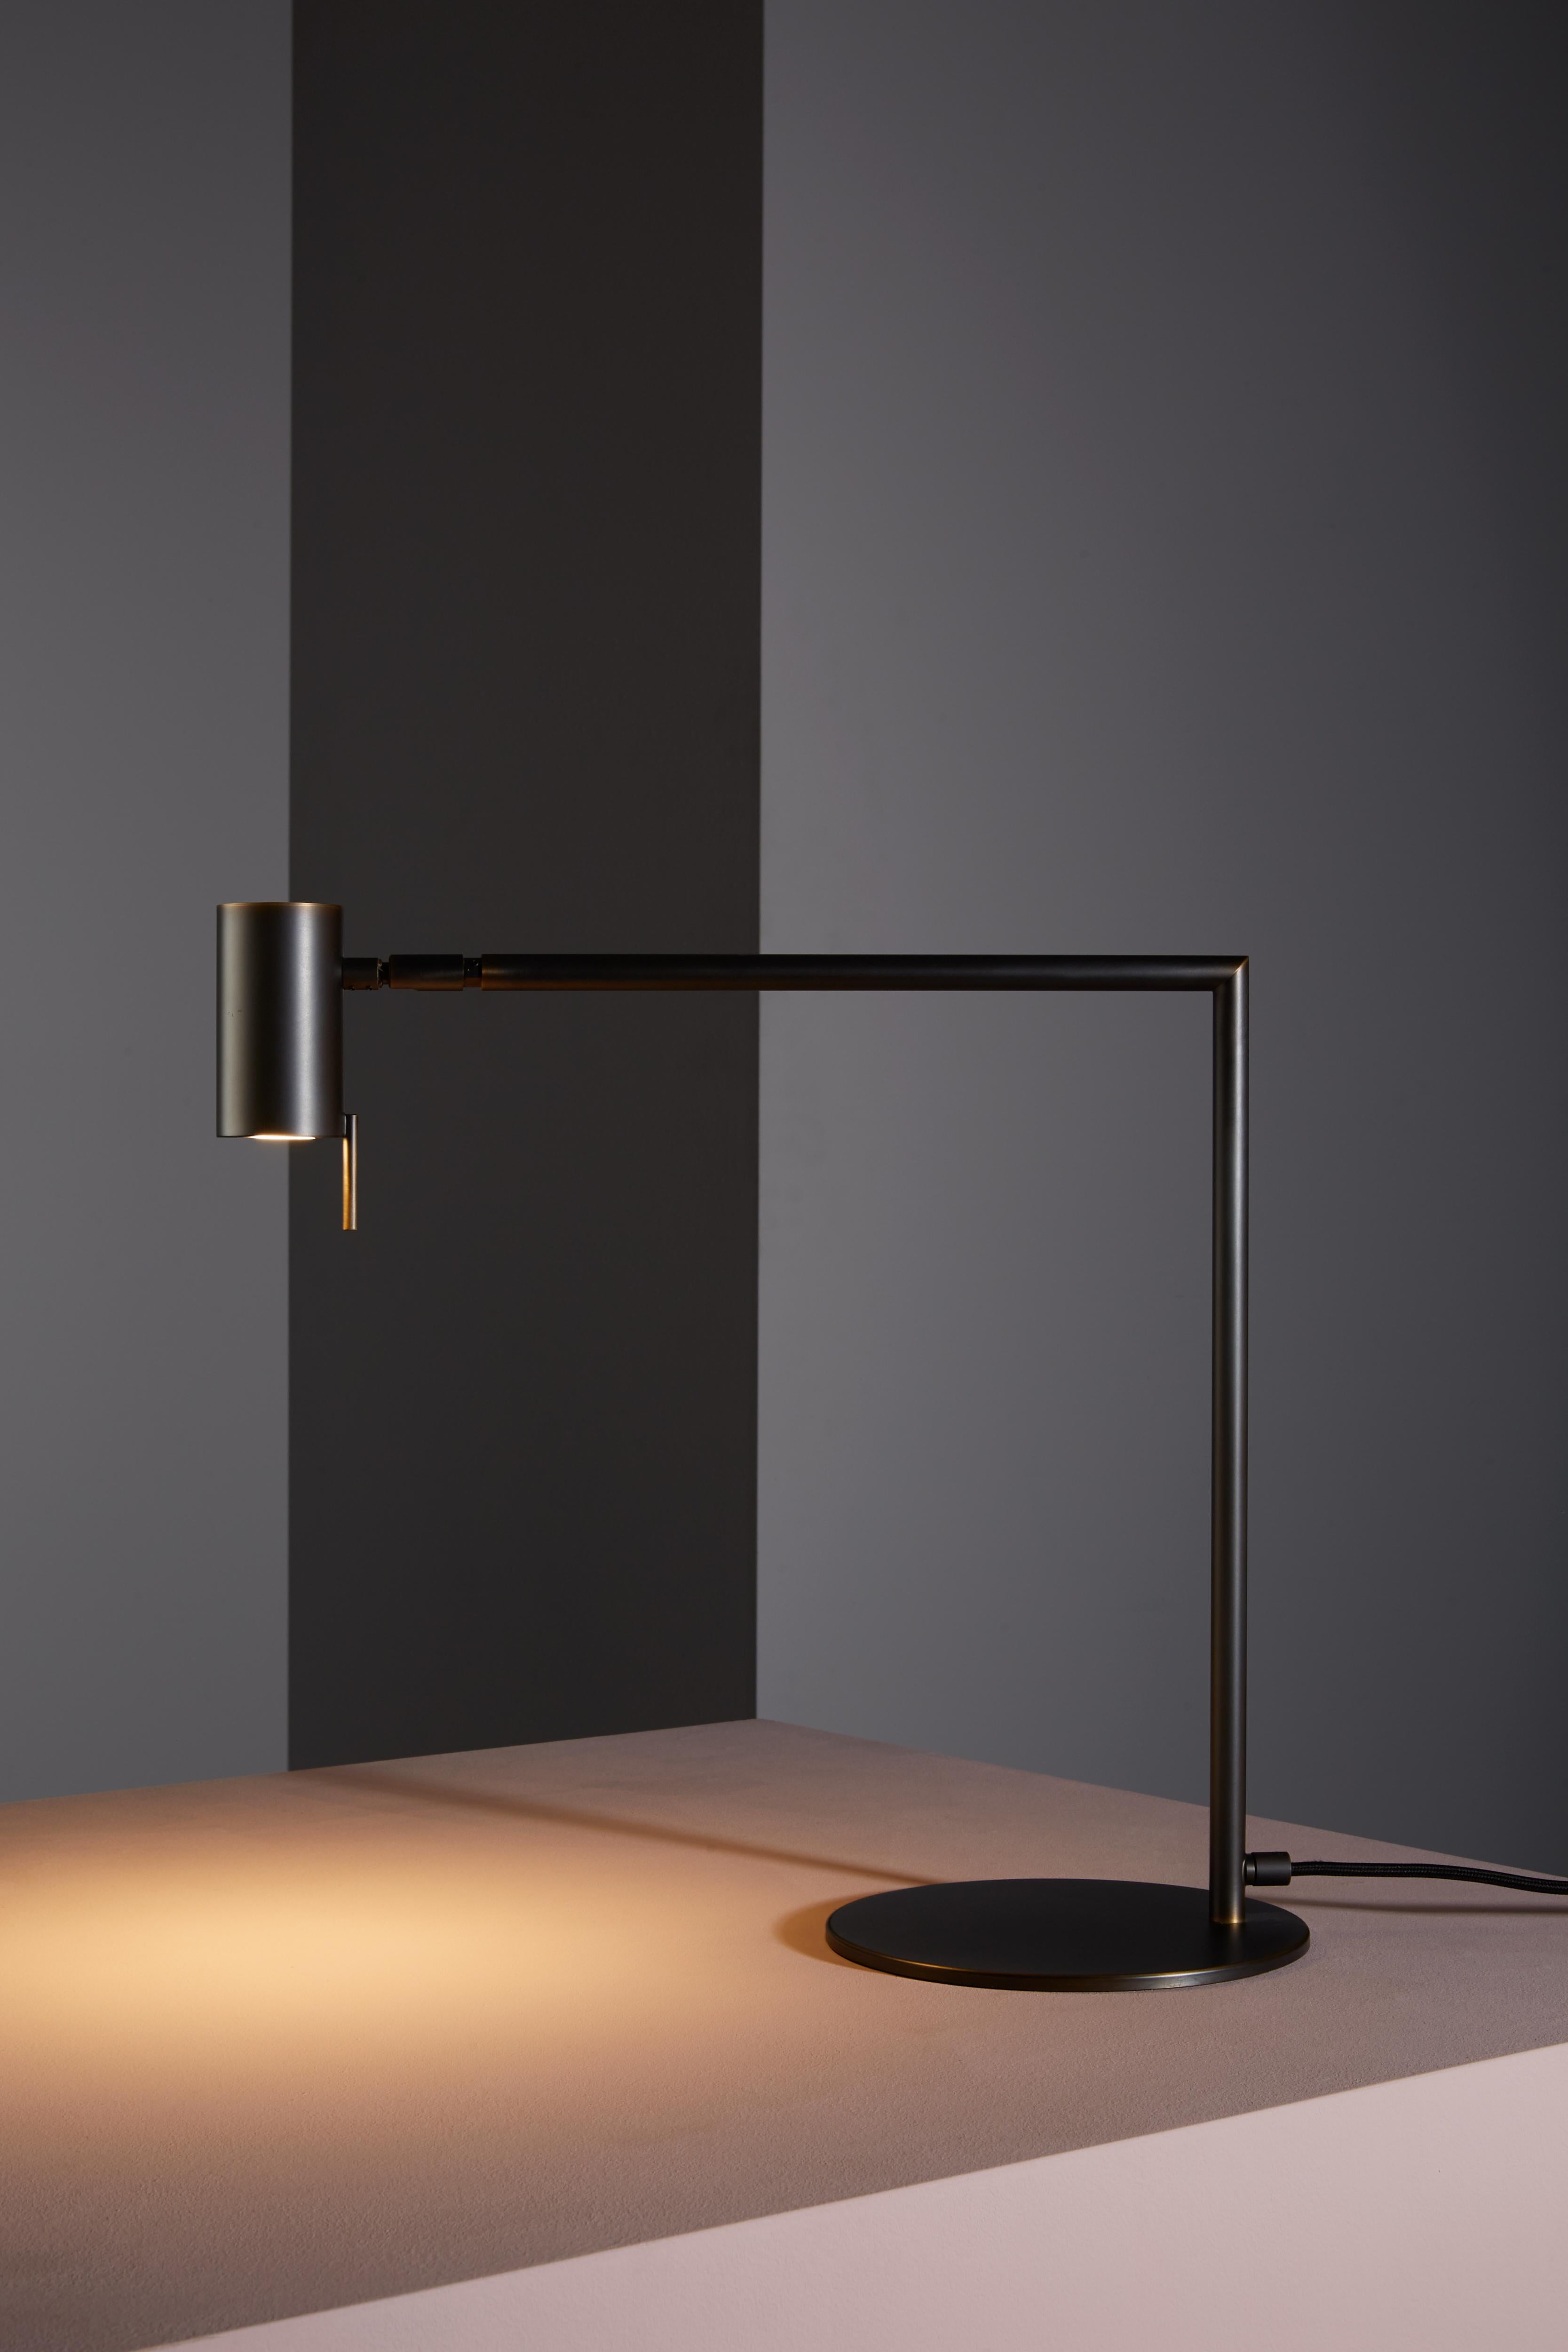 Table lamp with directional light. Dark burnished brass structure and adjustable joint.
 
Location: Interior
Light source: 1×6W GU10 PAR 16 LED 560lm 2700°K CRI 80
Voltage: 110 - 120 V / 220 - 240 V
Frequency: 50 - 60 Hz
Dimmable: Yes (bulbs